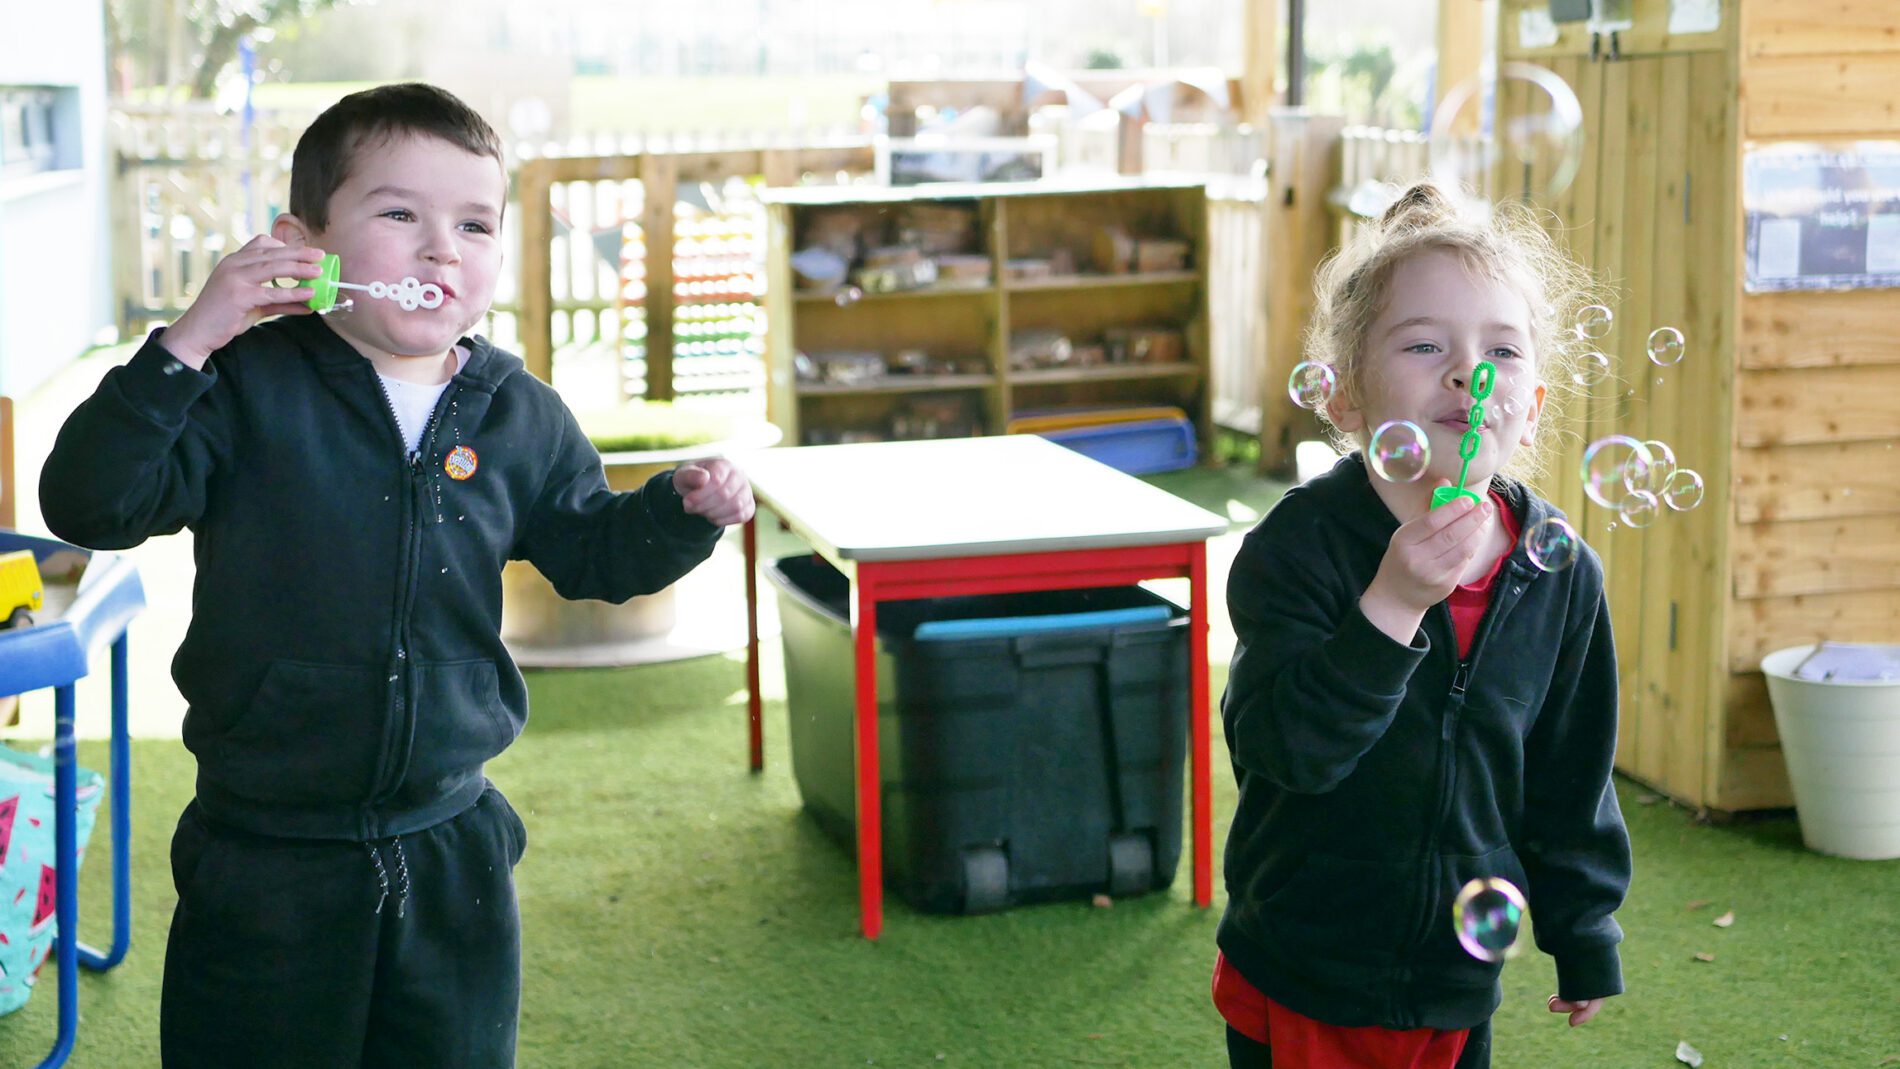 eyfs oupils blowing bubbles in science lessons